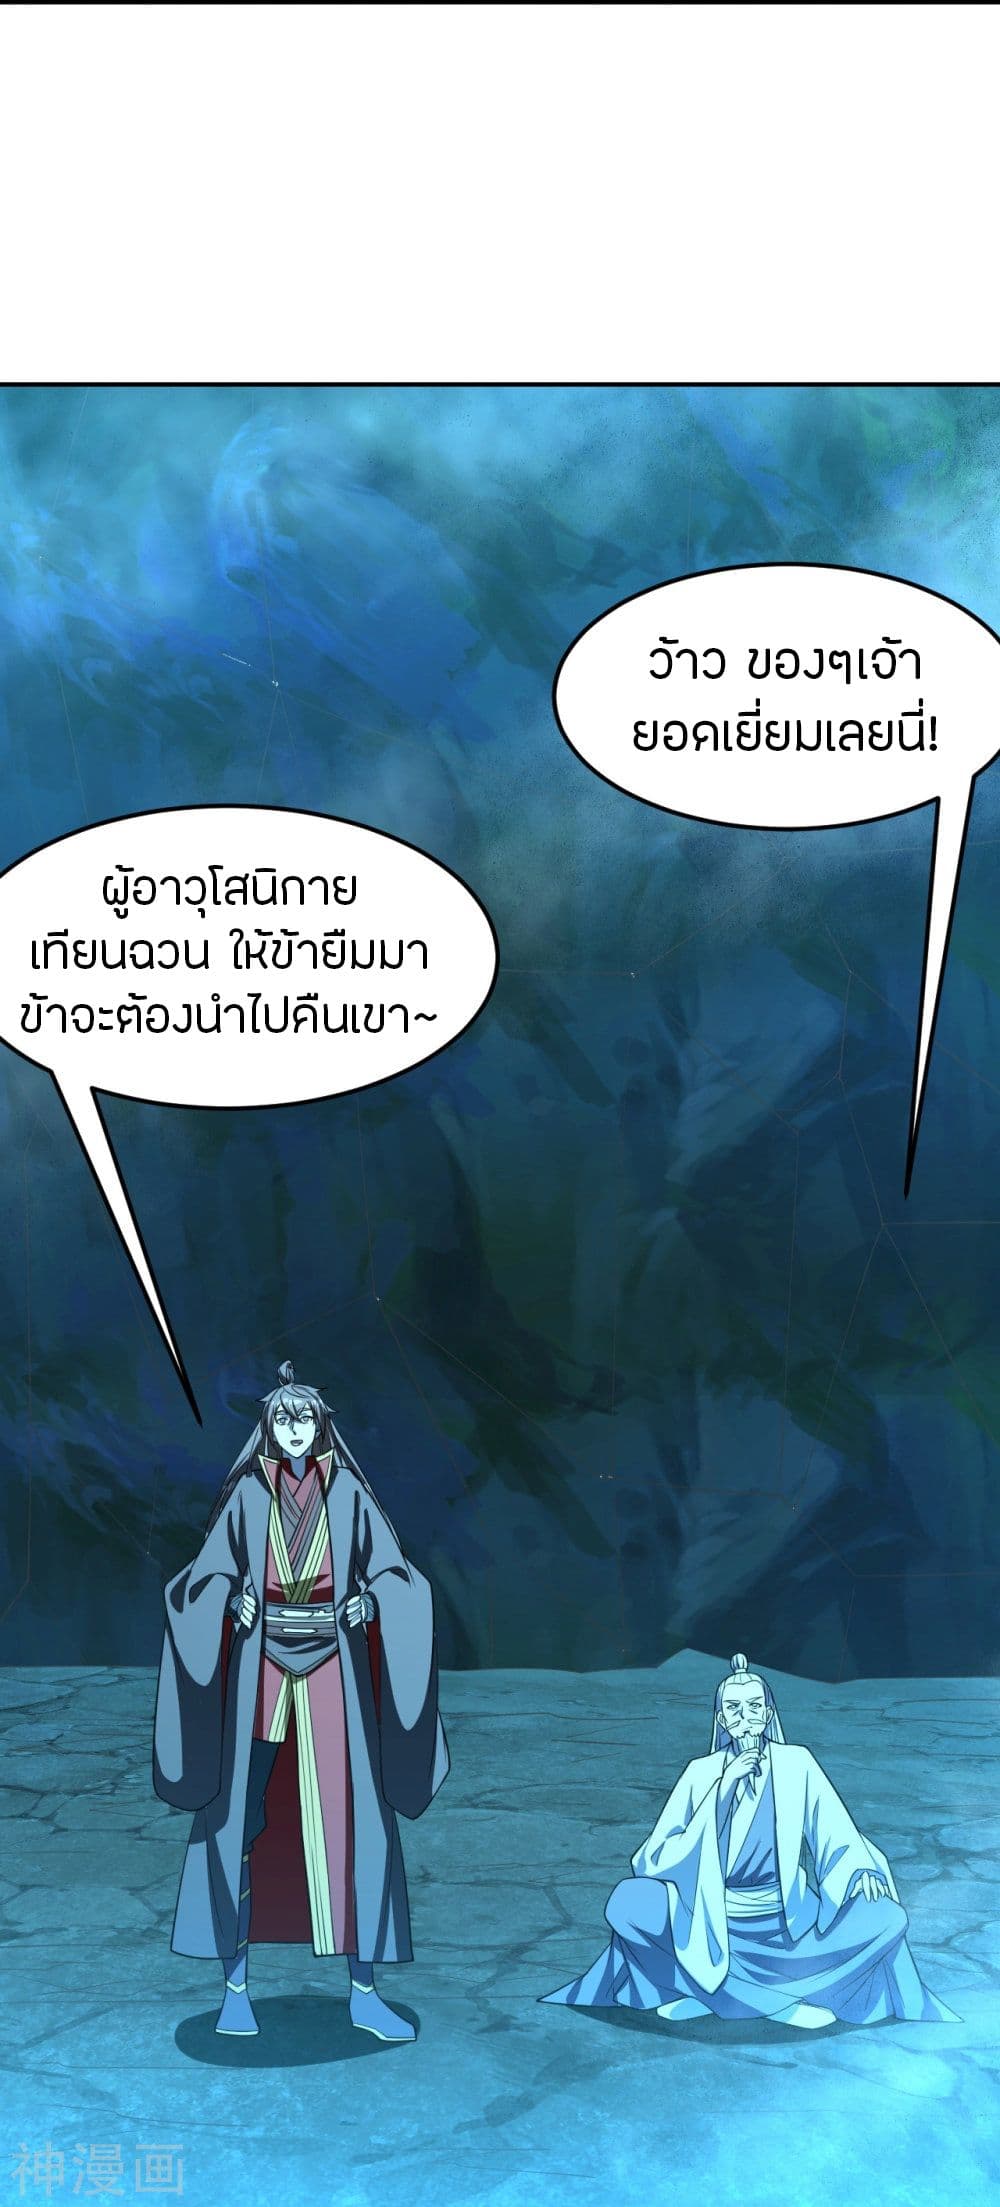 Banished Disciple's Counterattack เธเธฑเธเธฃเธเธฃเธฃเธ”เธดเน€เธเธตเธขเธเธขเธธเธ—เธ 239 (57)